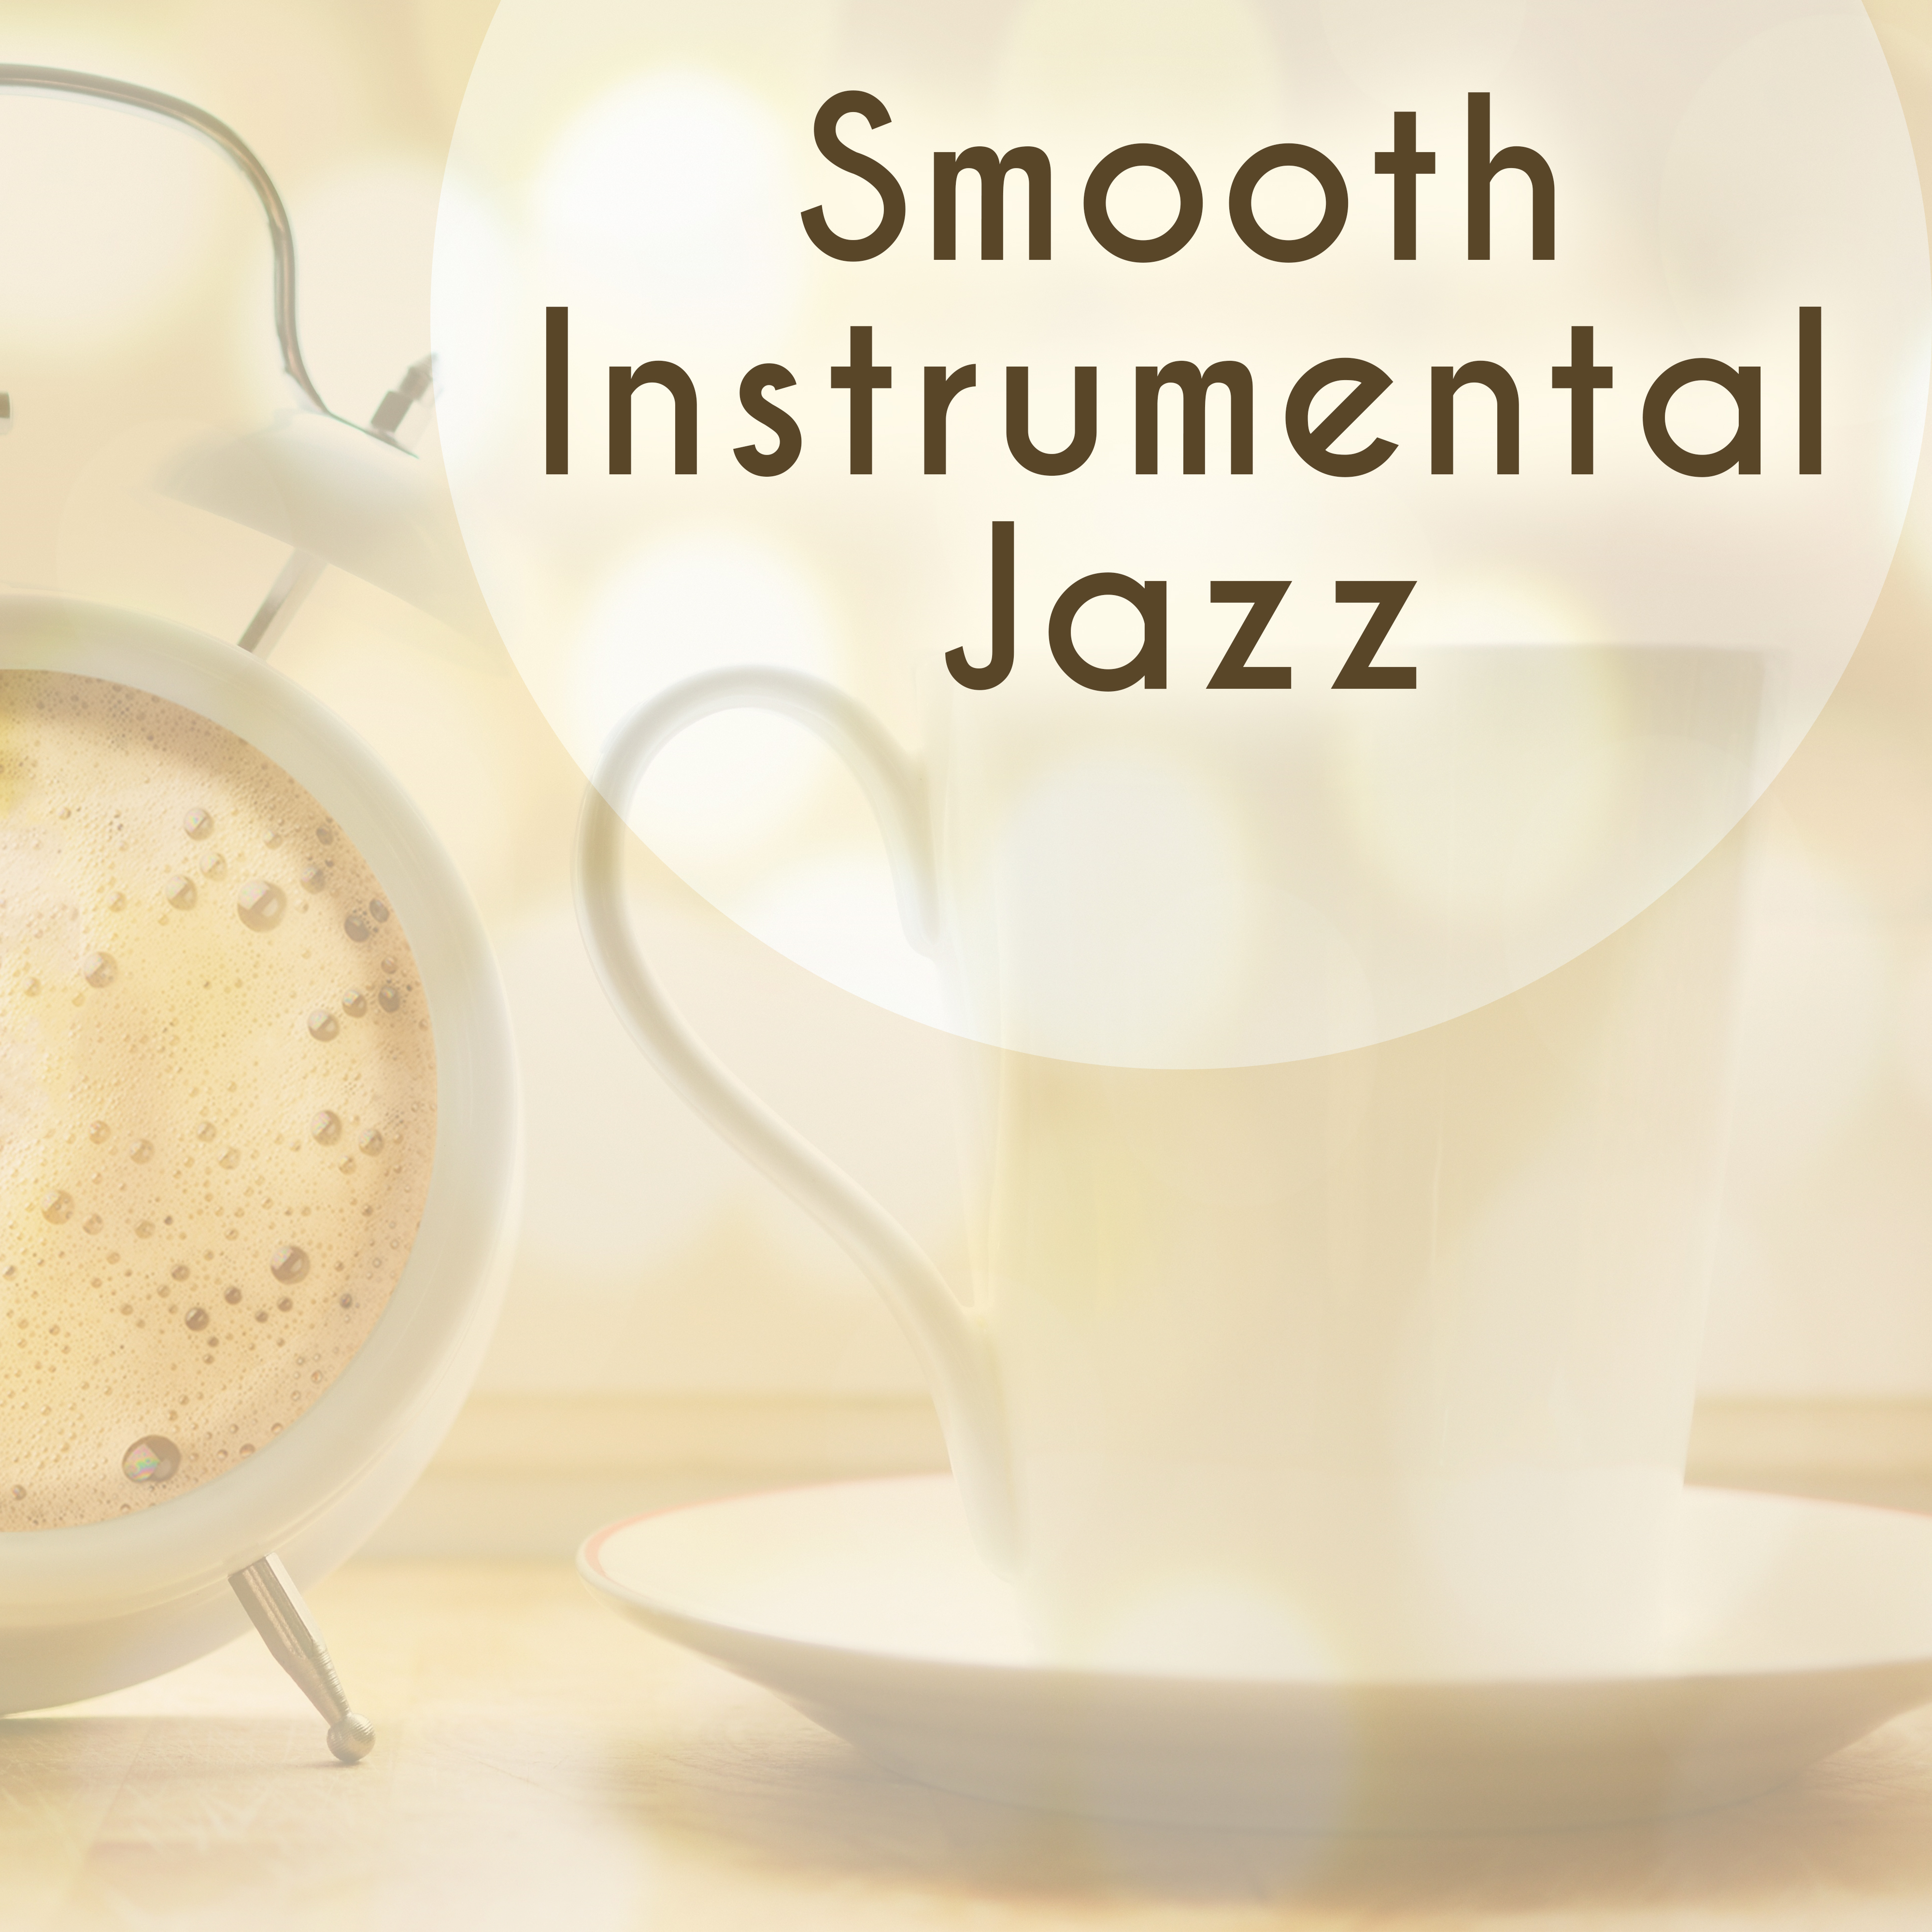 Smooth Instrumental Jazz  Calming Note, Jazz Music to Relax, Stress Relief, Morning Piano Jazz